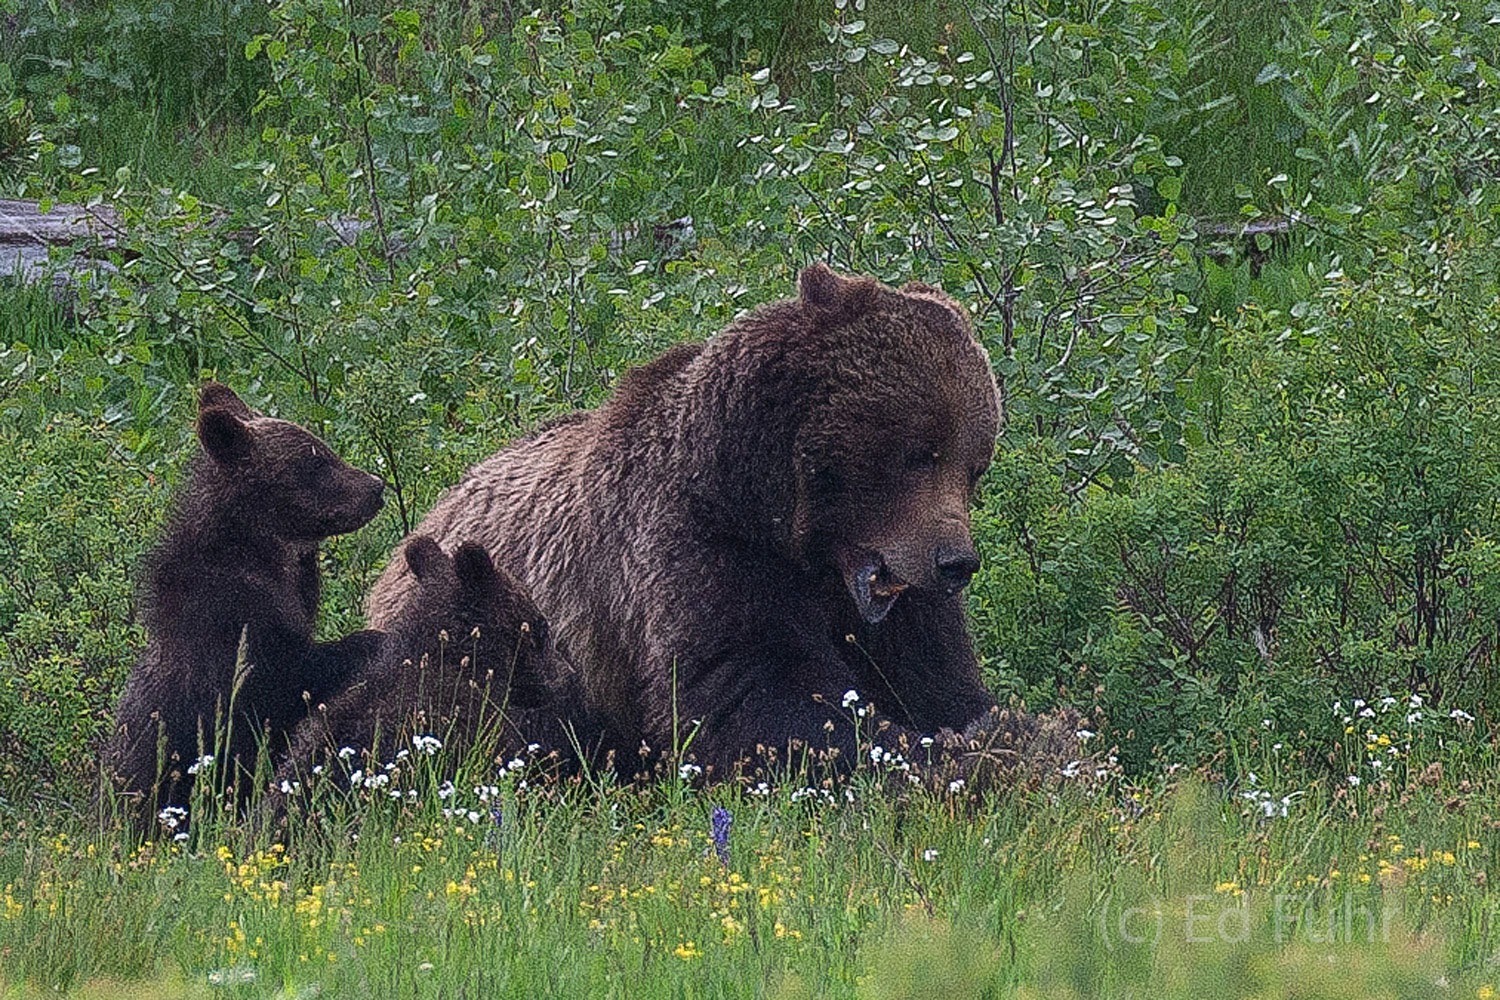 Tired of her cub's bites, grizzly 399 gives one of her triplet cubs an old fashioned smackdown in June 2011.